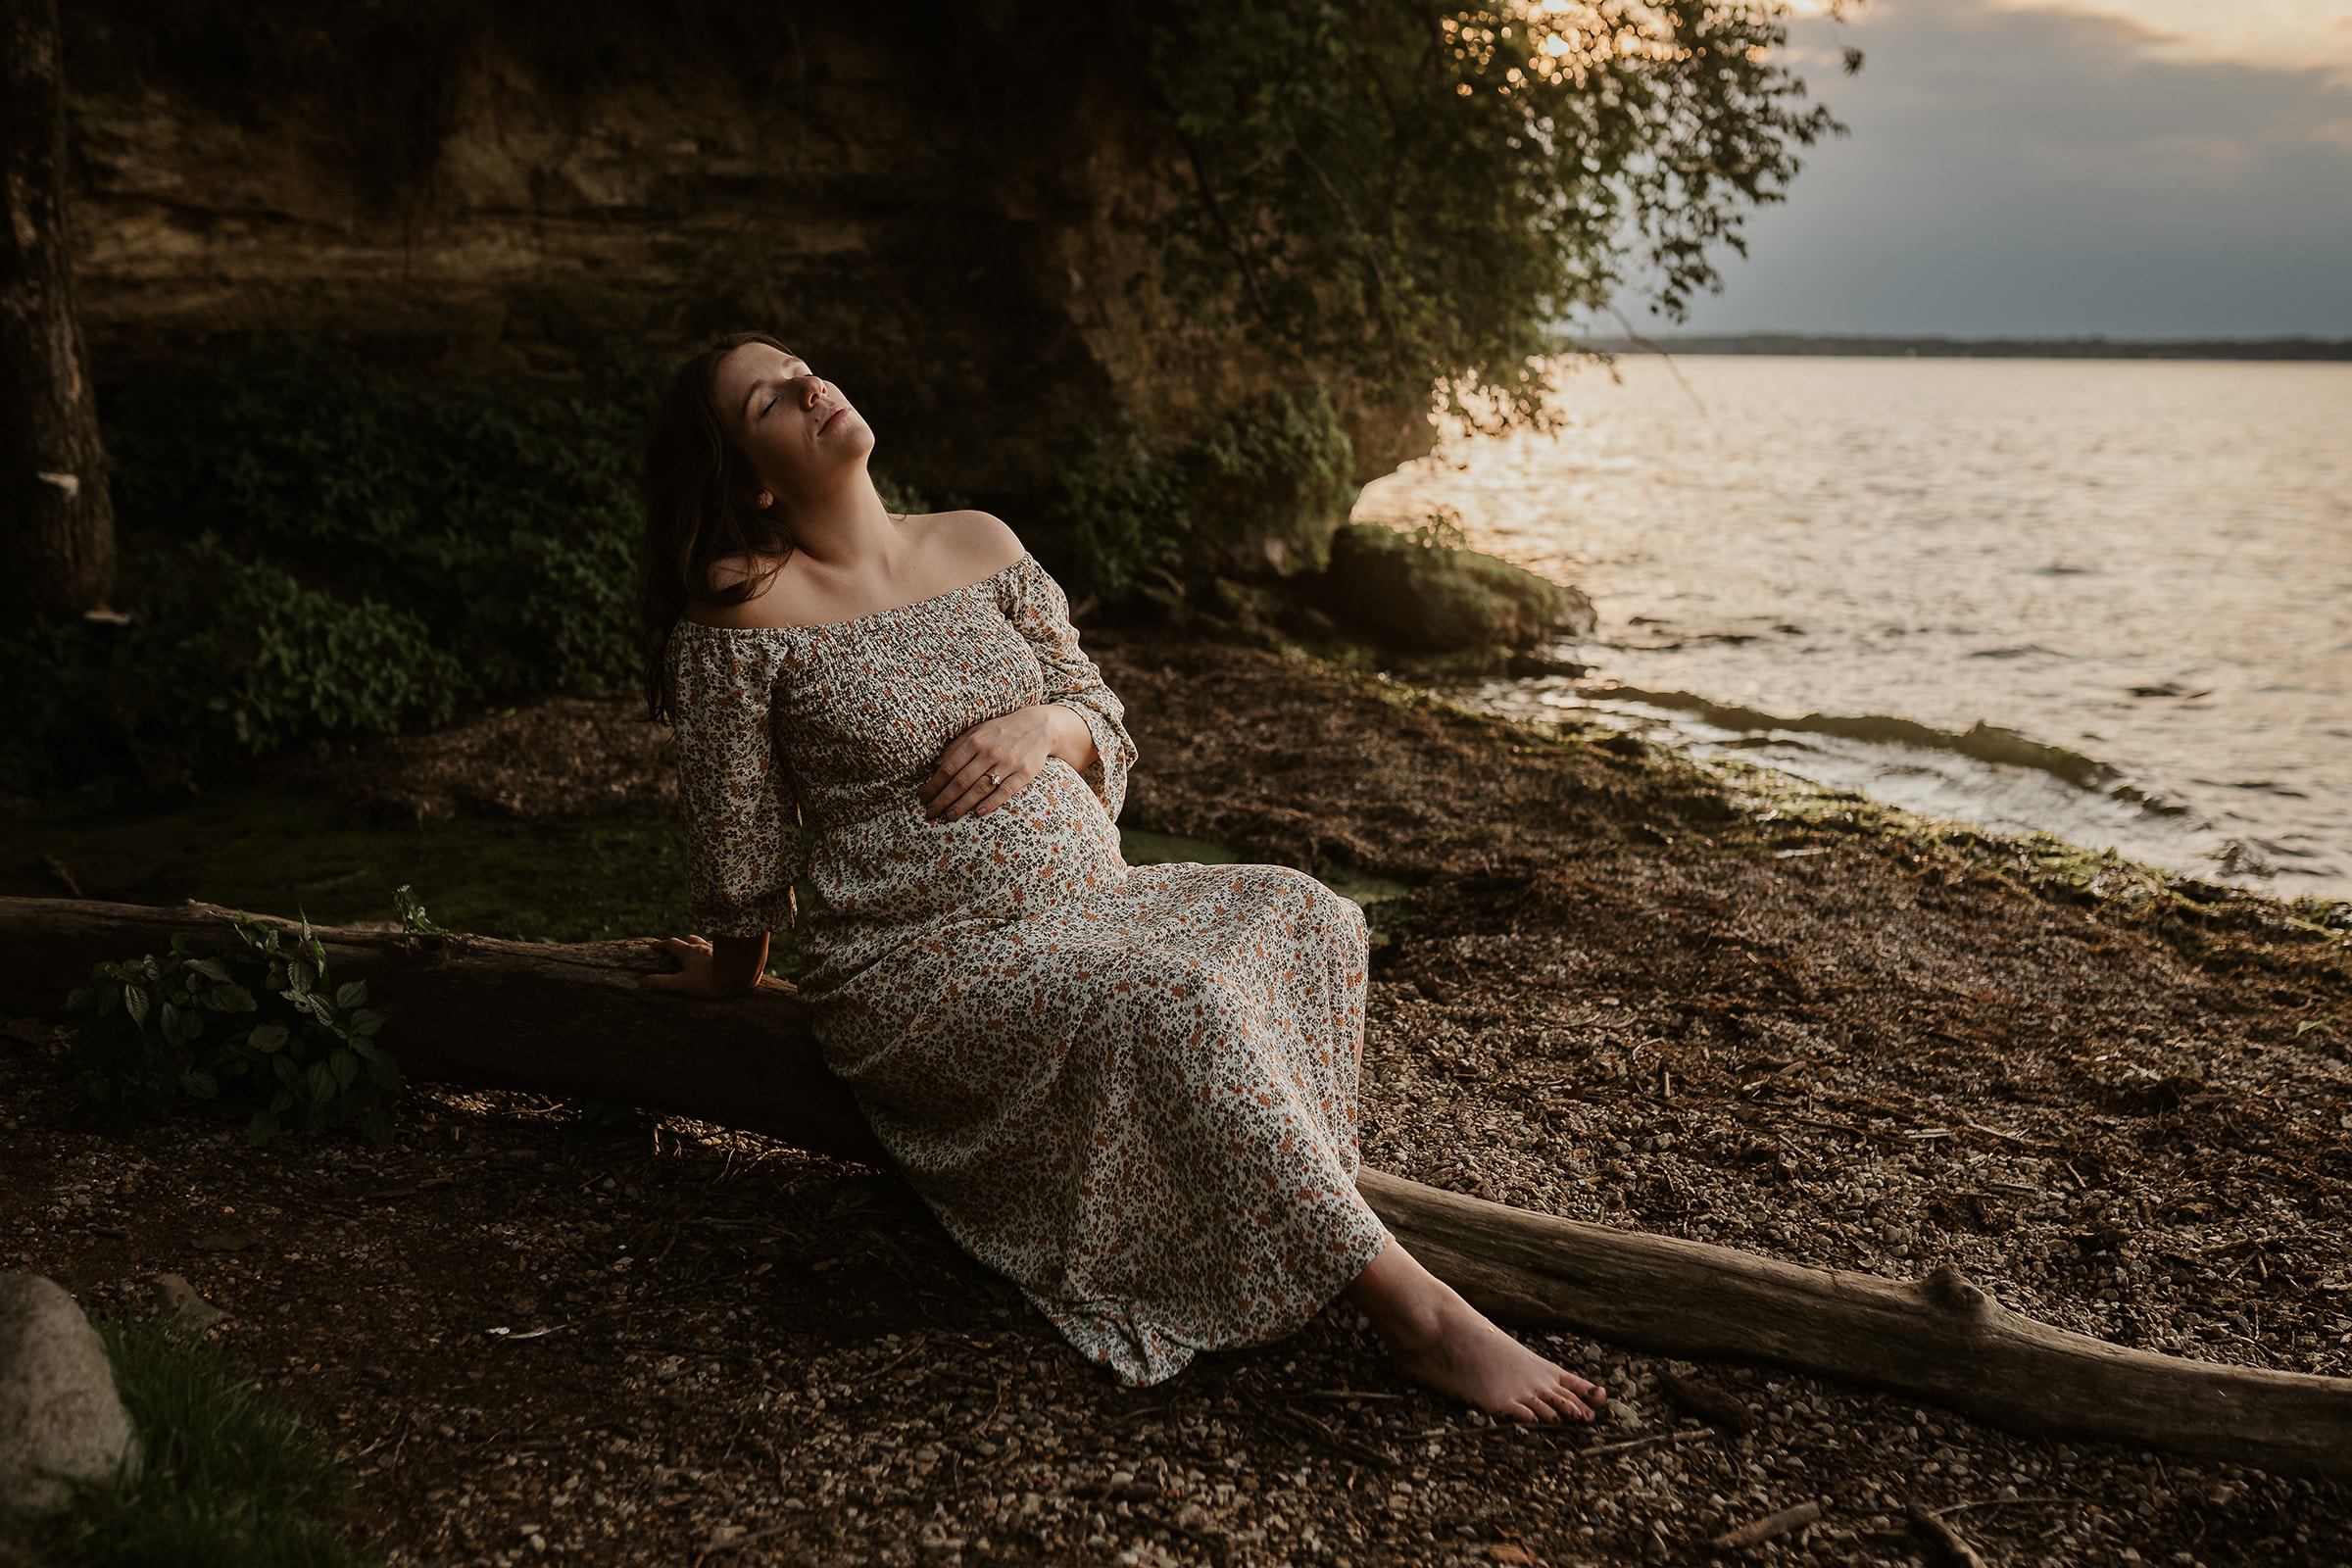 Pregnant woman sitting near the lake during sunset for a maternity session